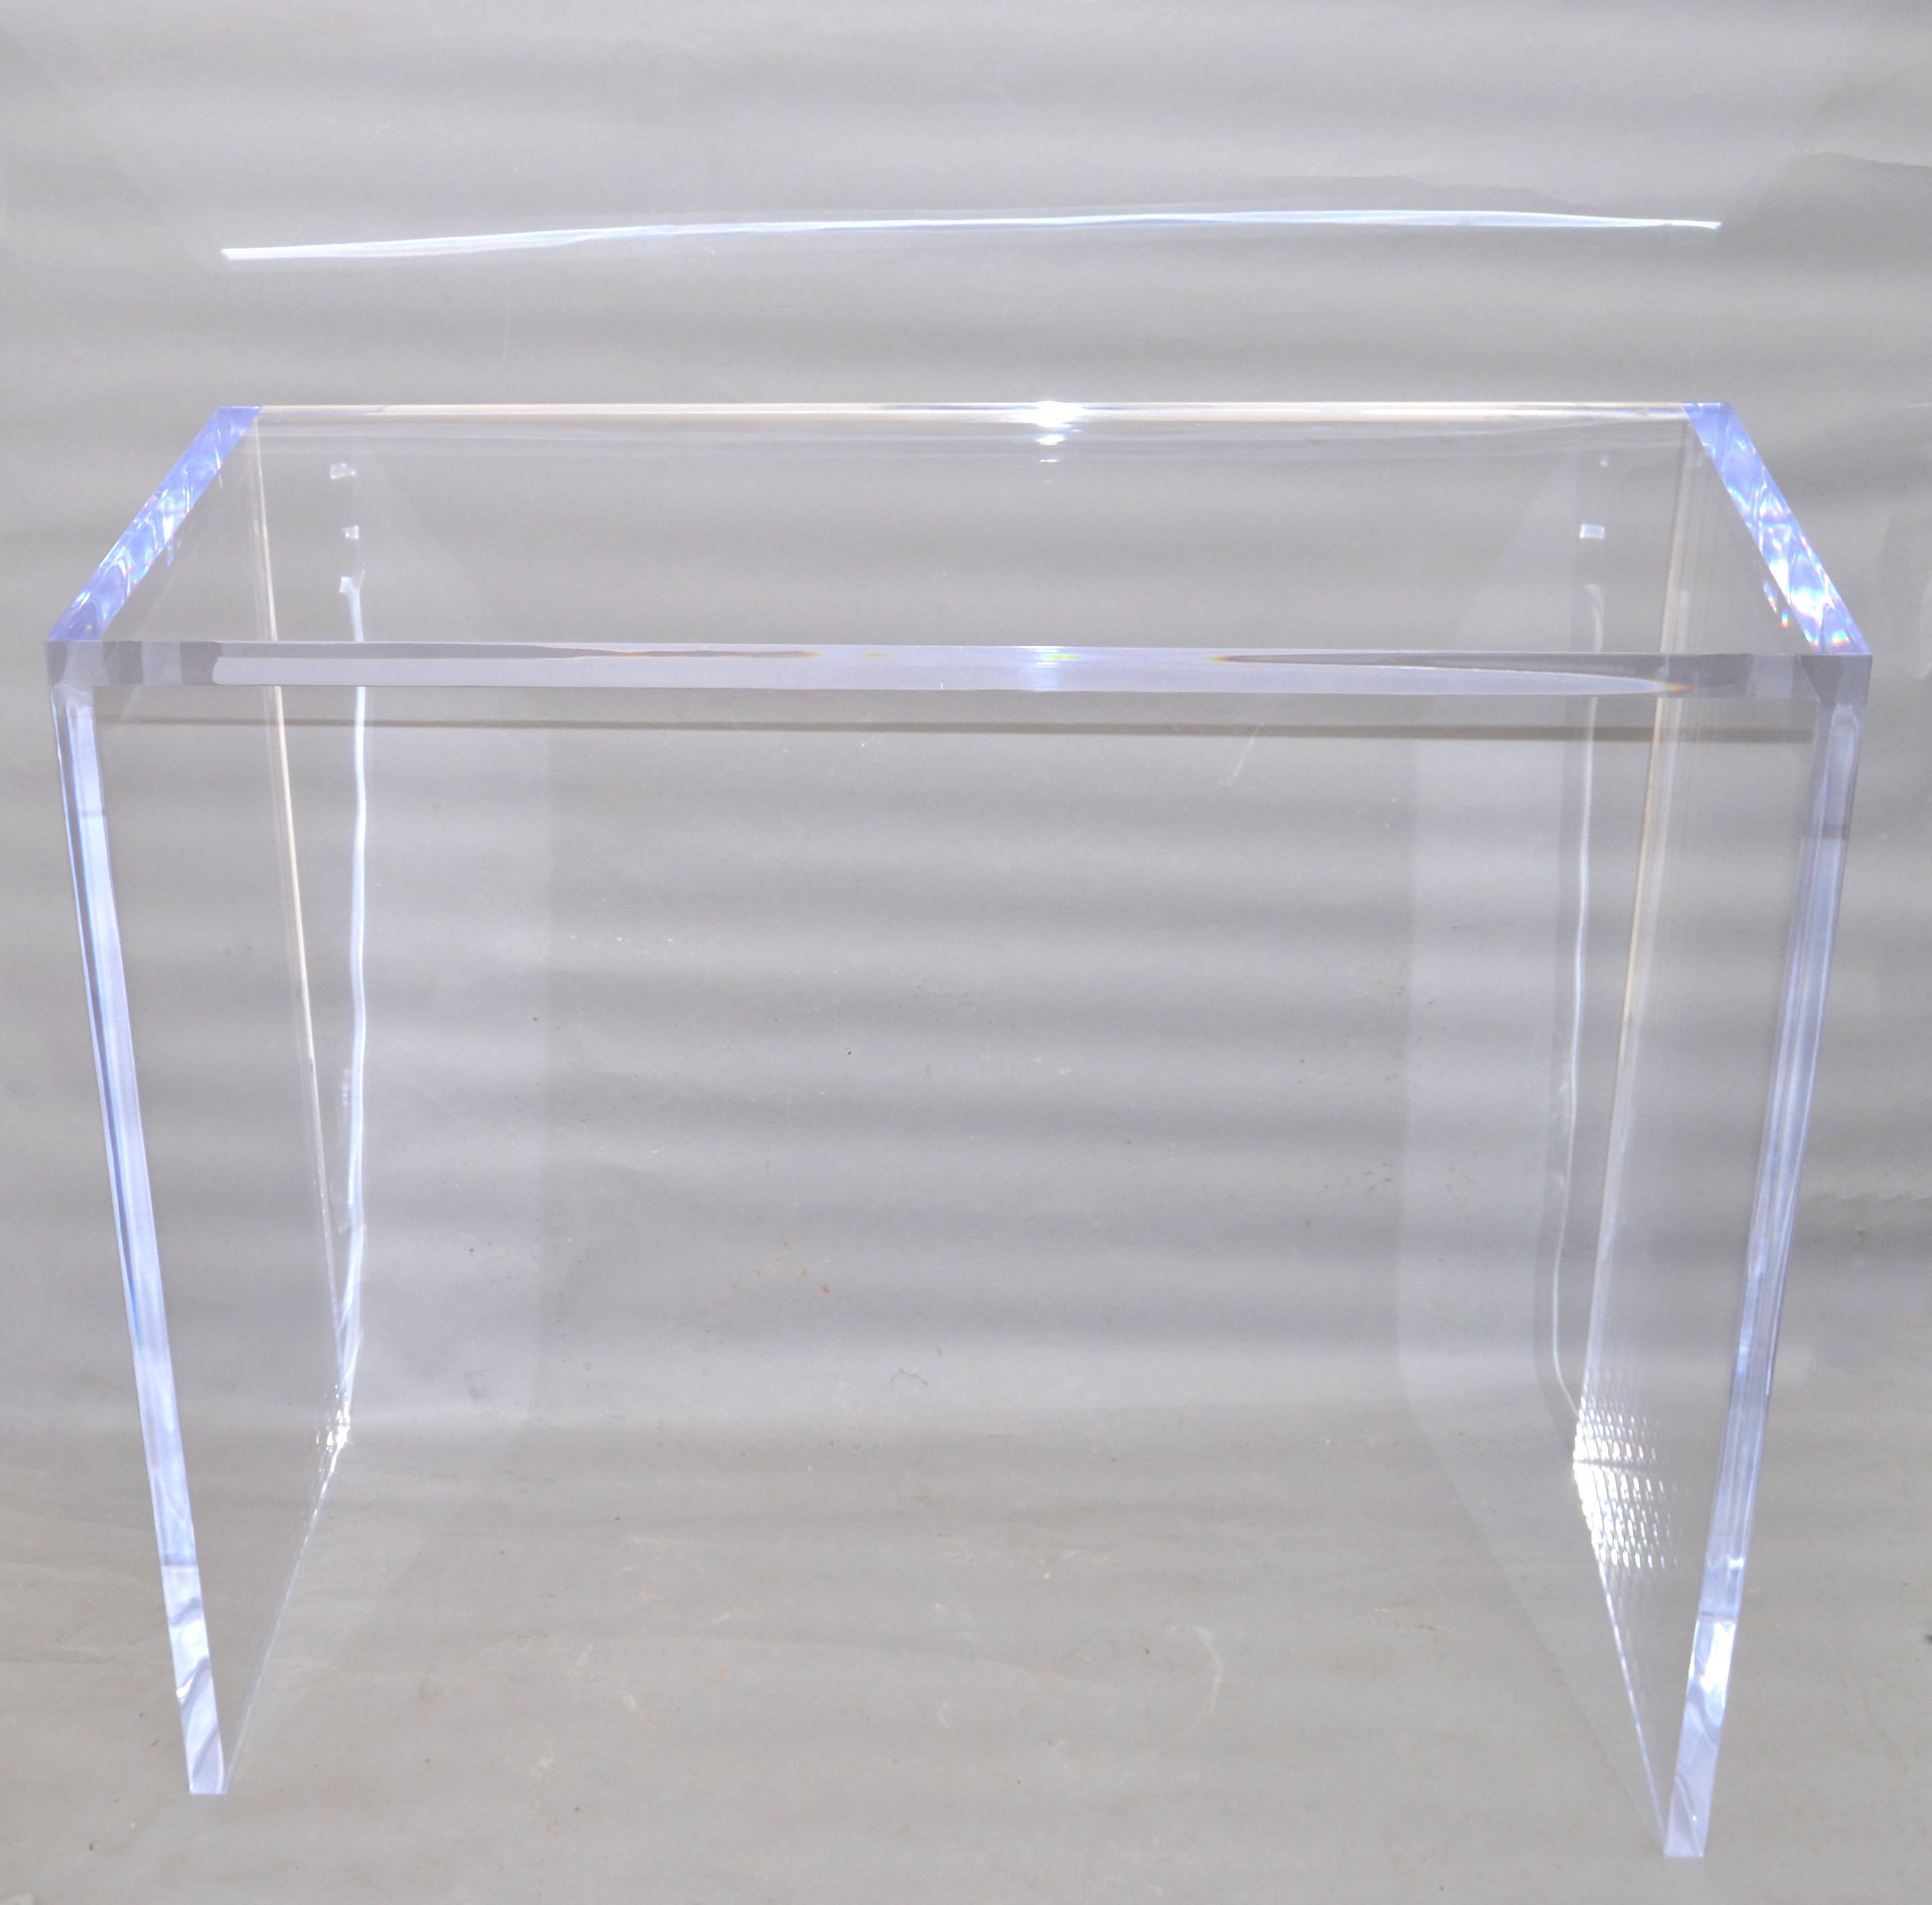 Modern Contemporary handmade clear Lucite console, hallway table, vanity.
Thick Lucite panels make this Console sturdy and durable.